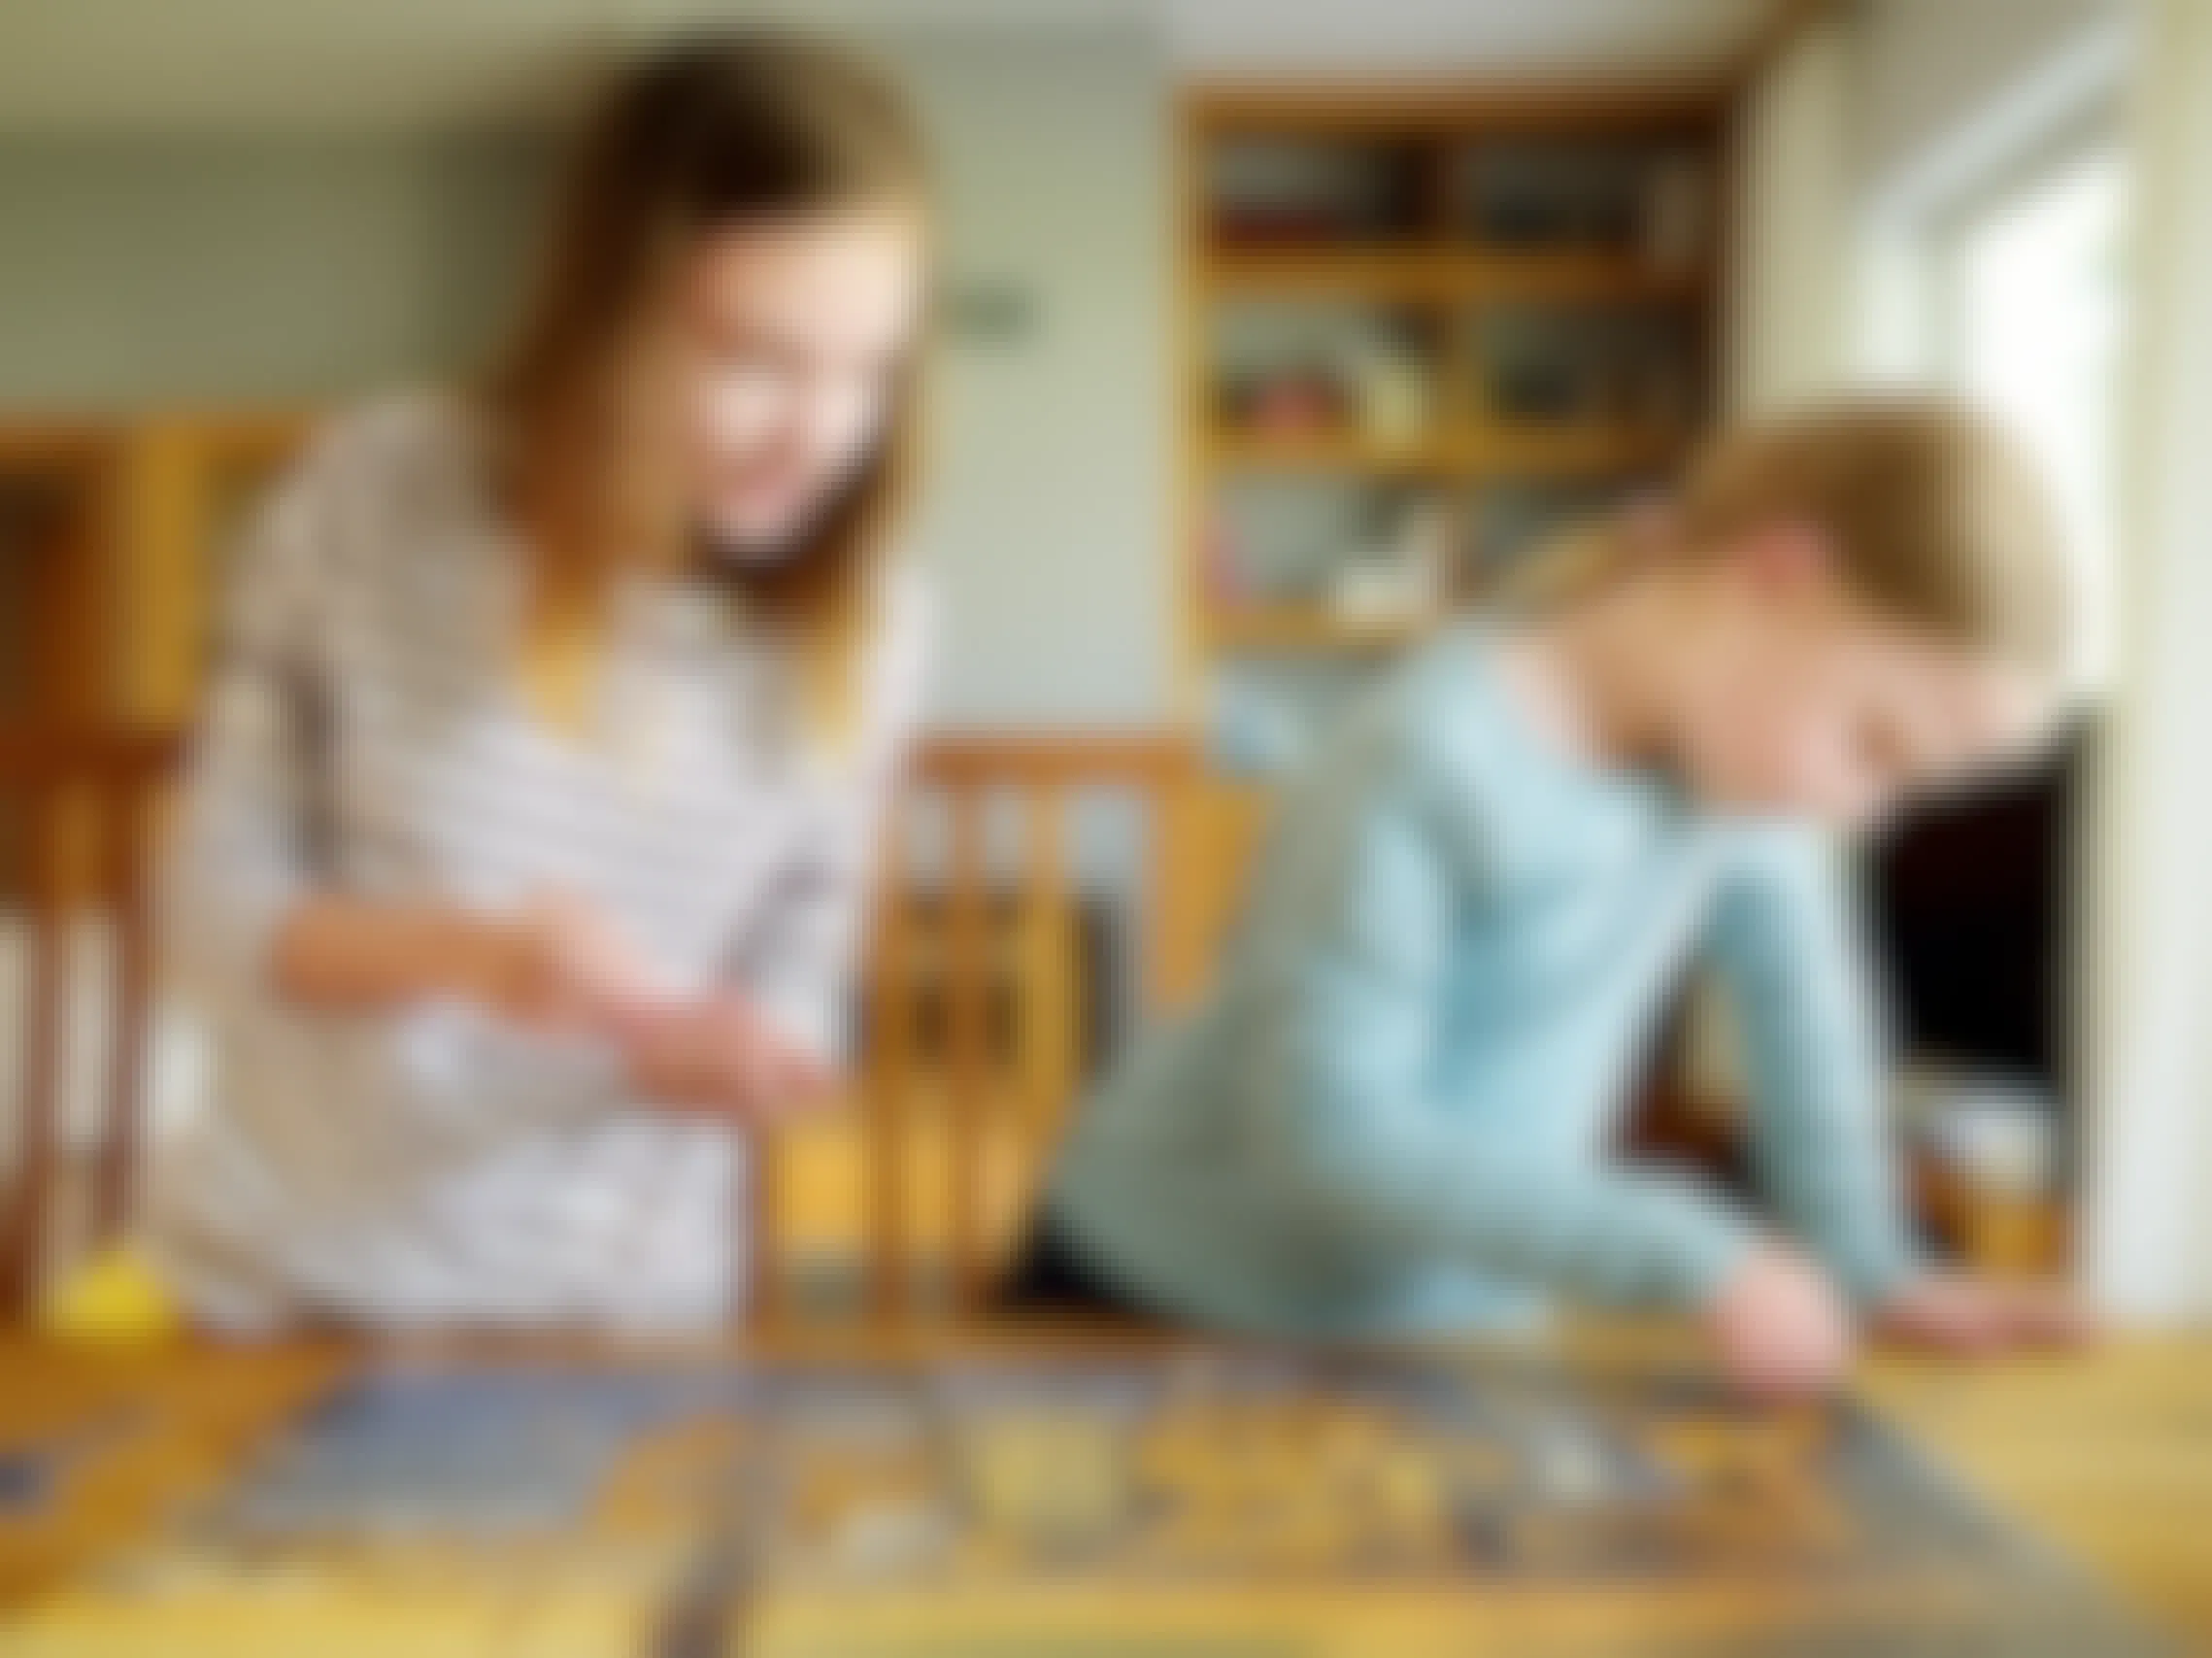 Two girls working on a jigsaw puzzle on a wooden table in their house.